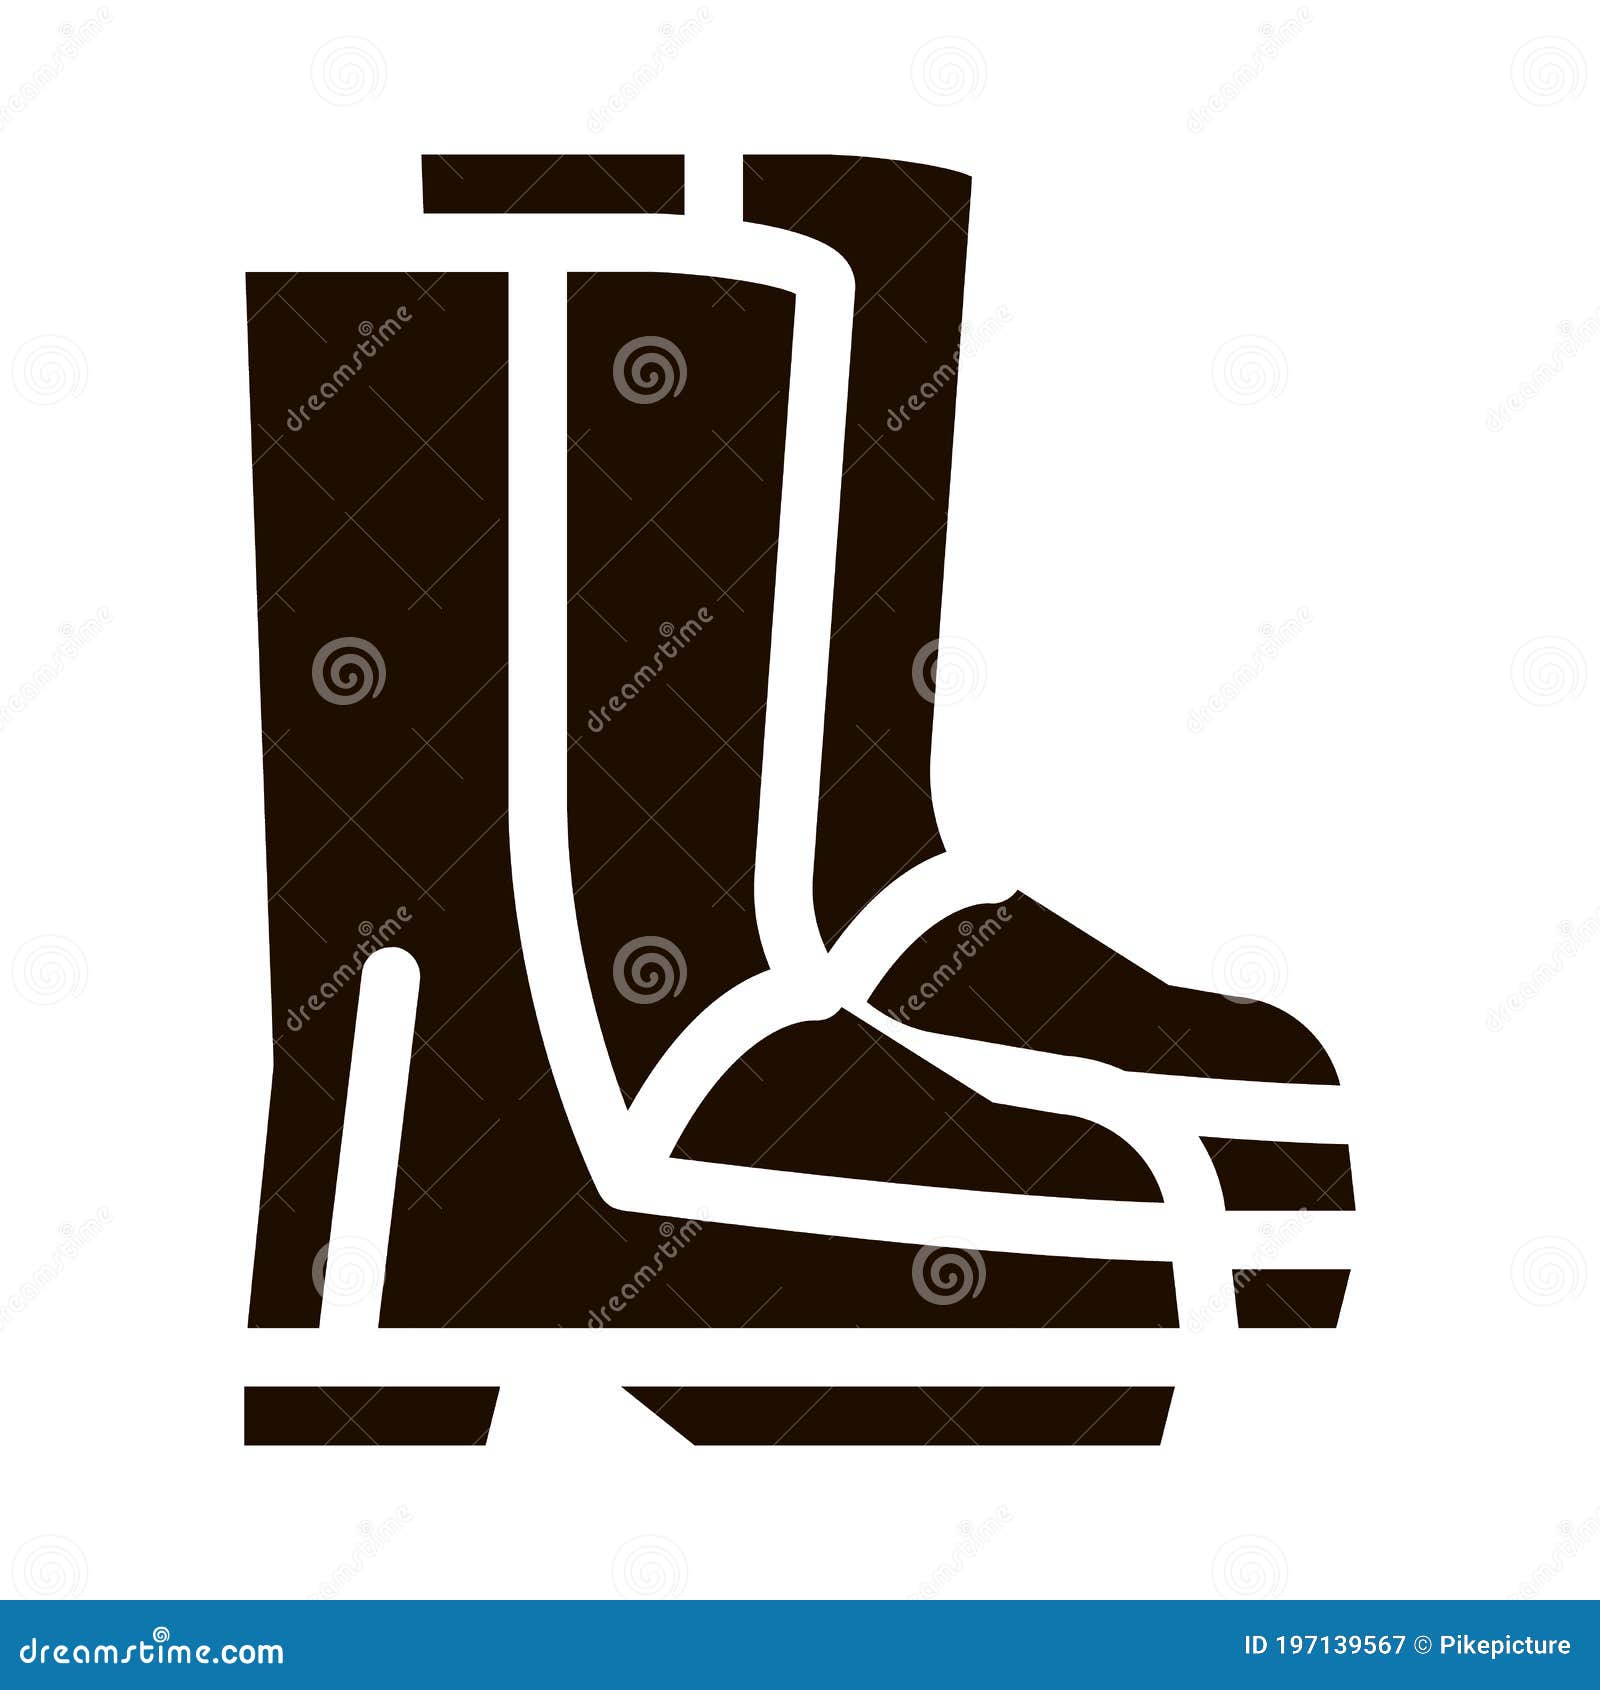 Waterproof Material Gumboots Shoes Glyph Icon Stock Vector ...